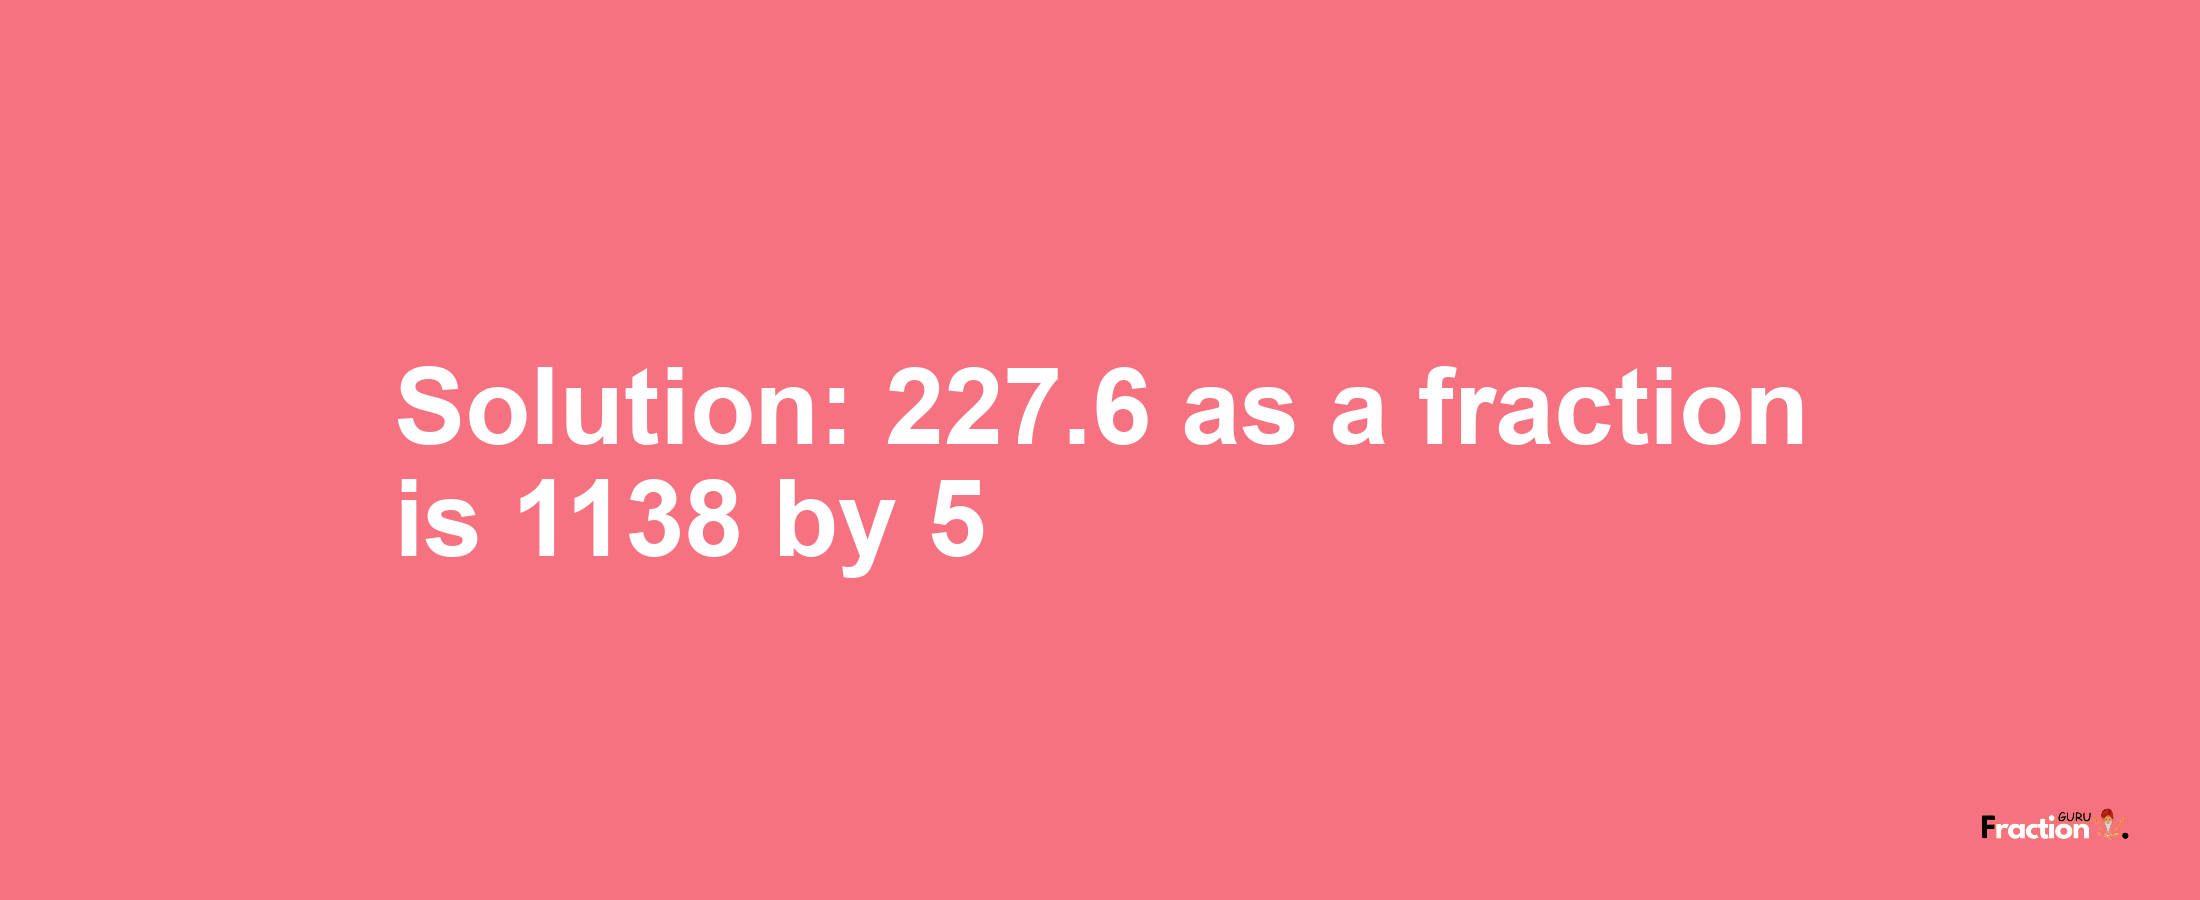 Solution:227.6 as a fraction is 1138/5